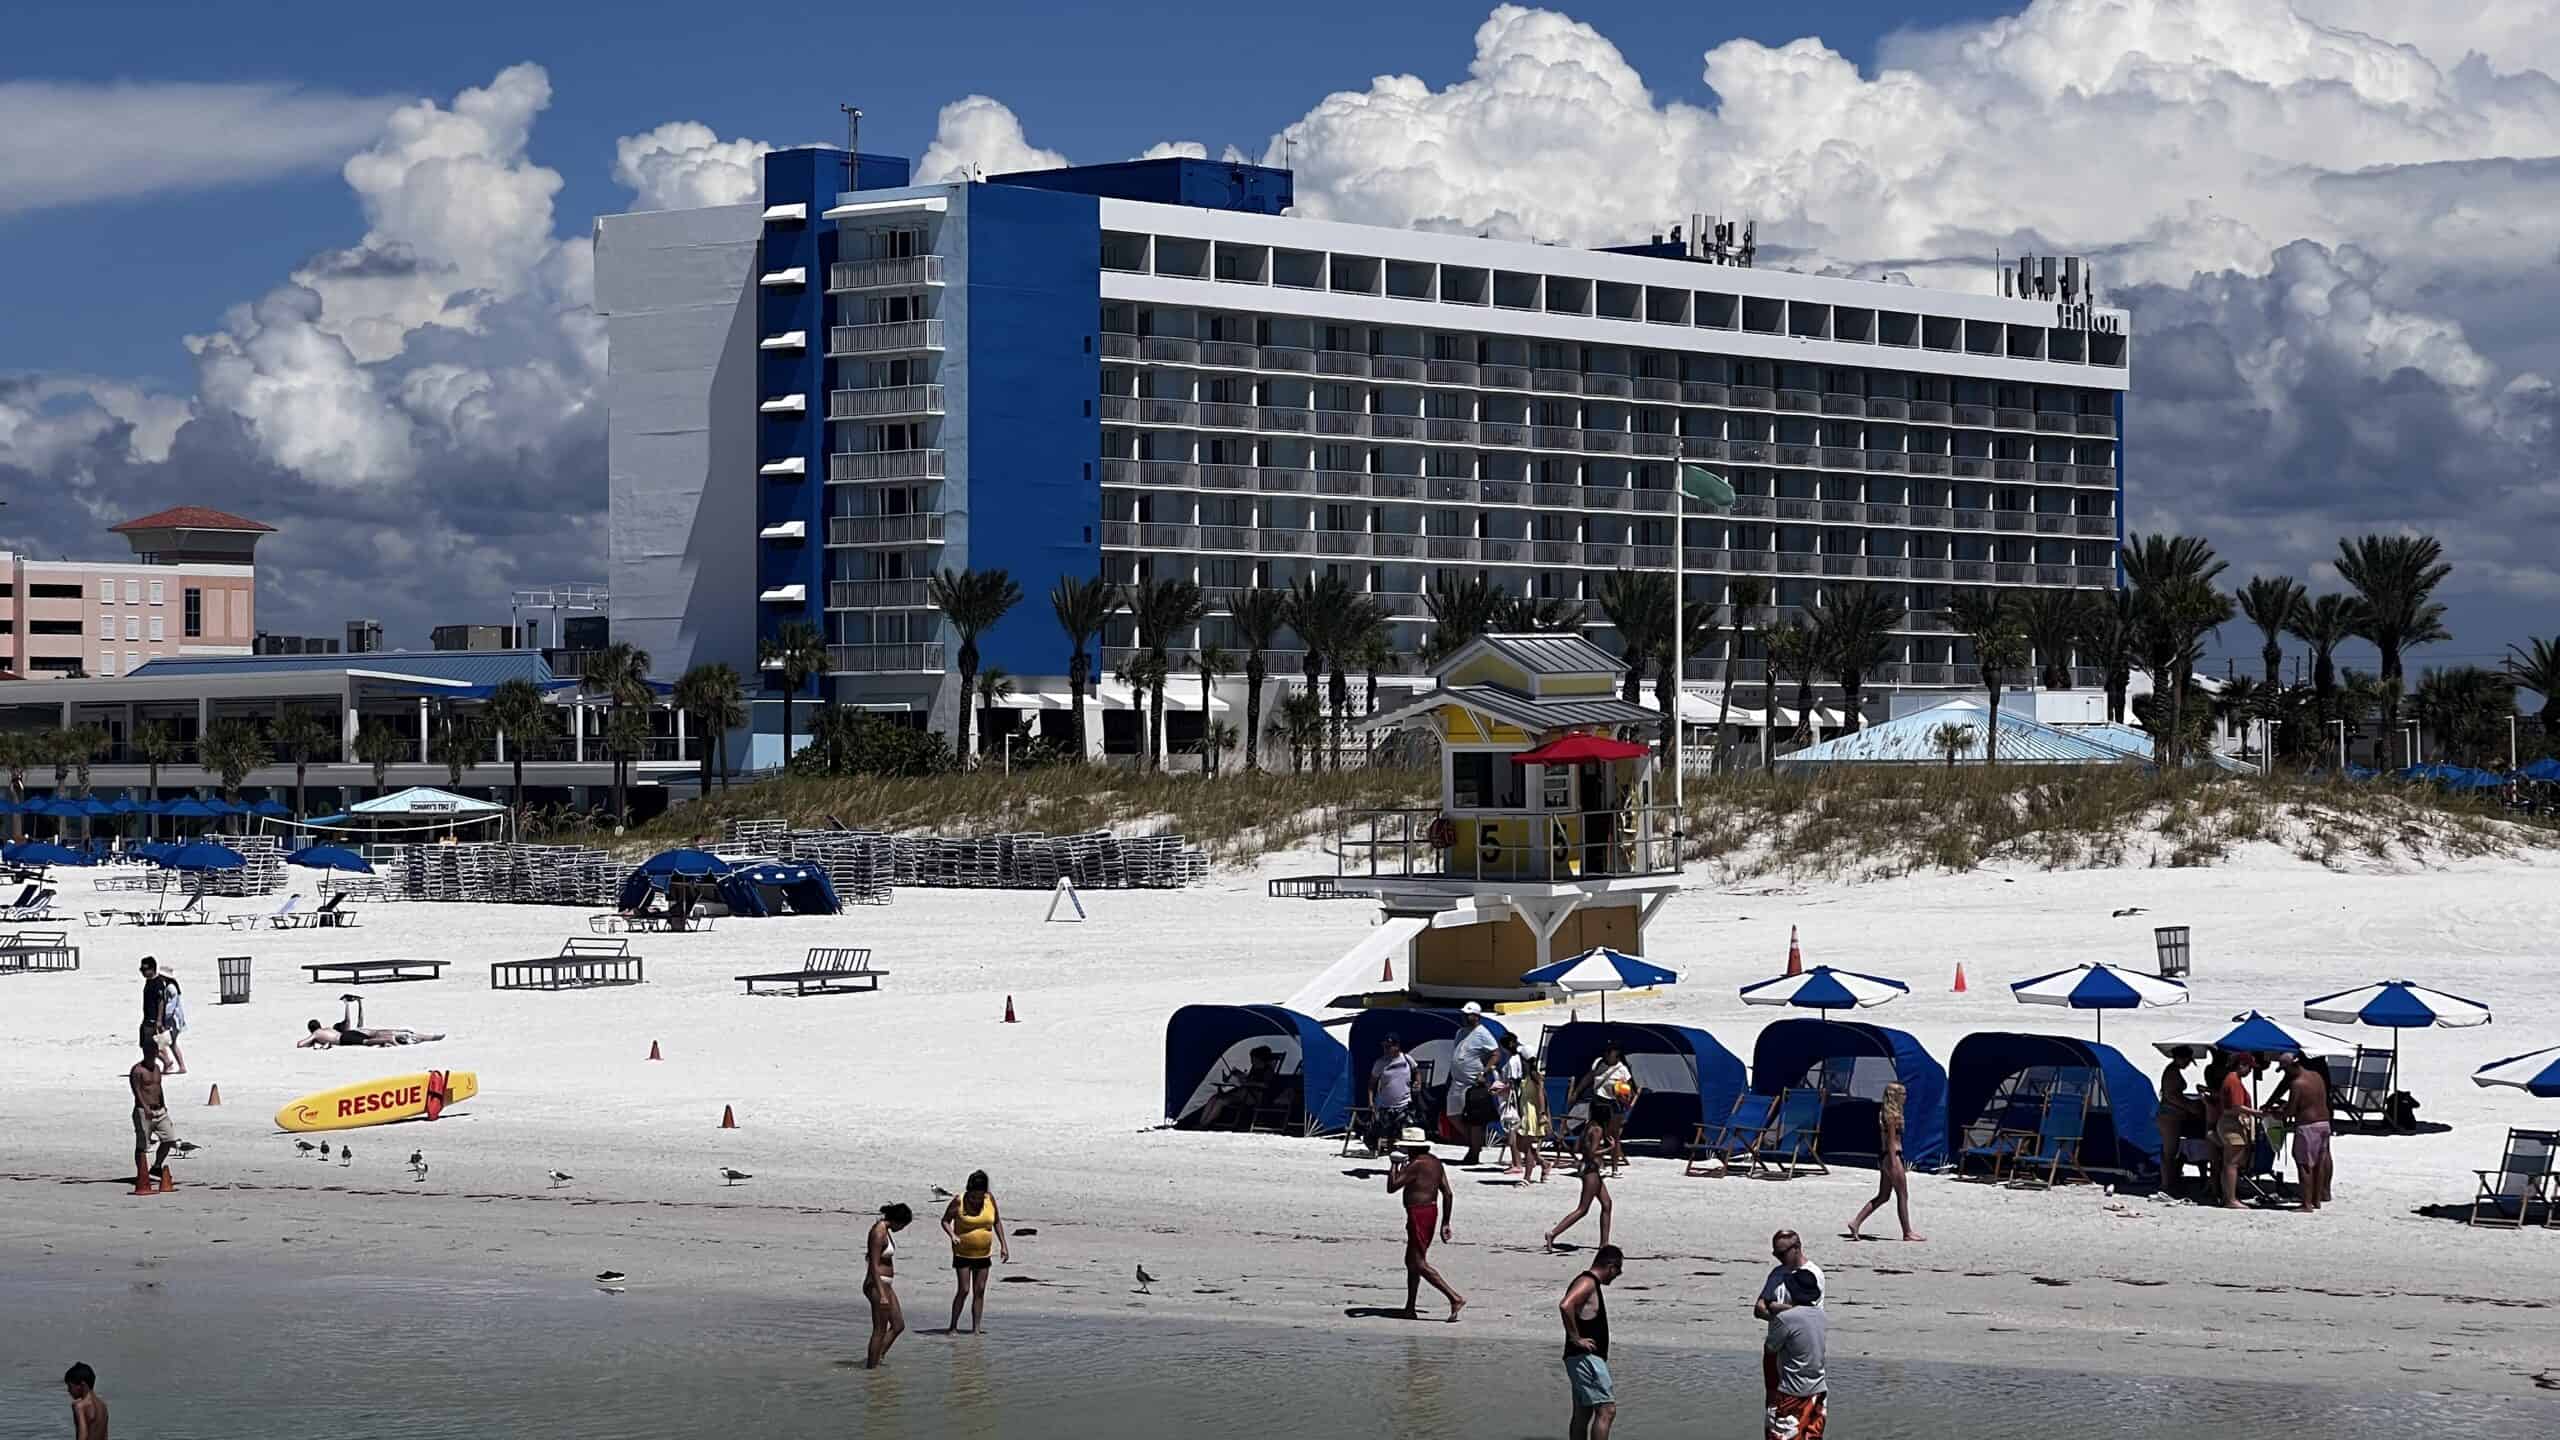 The Hilton property on Clearwater Beach.